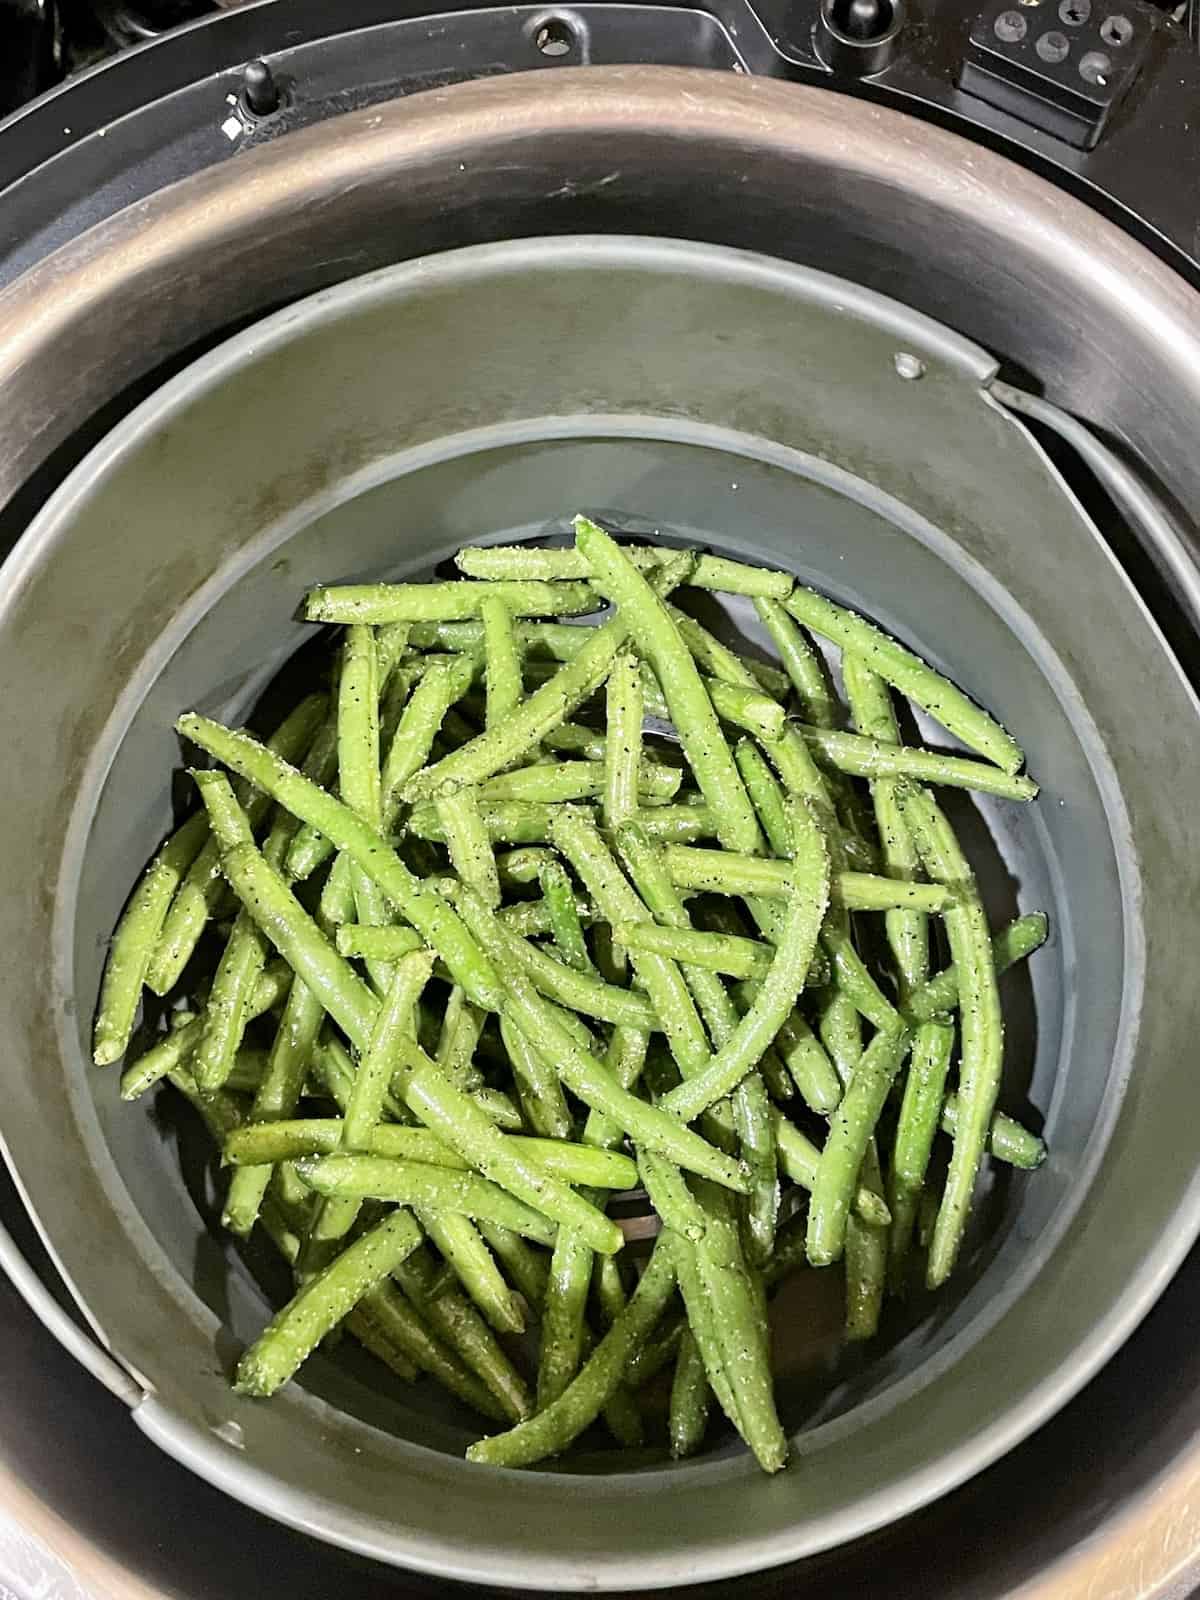 green beans in an air fryer basket before cooking